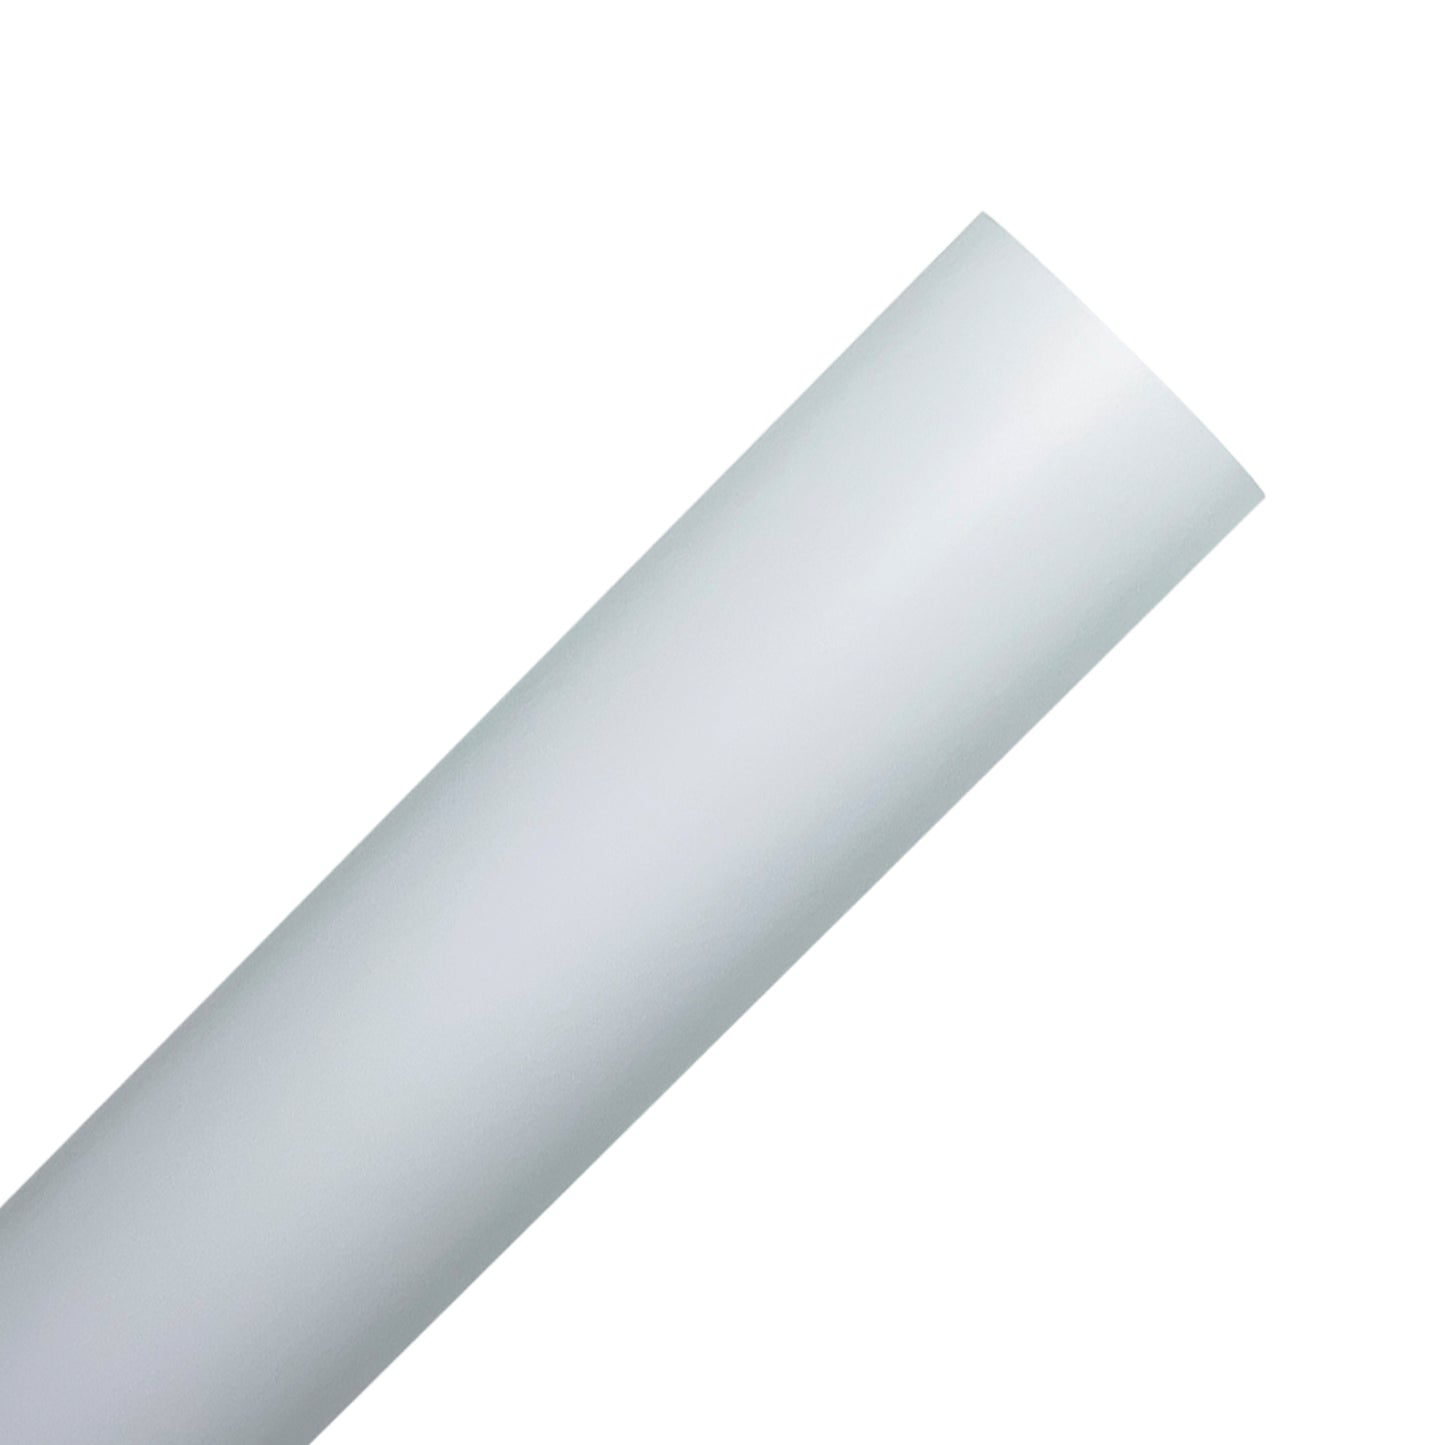 Matte White Adhesive Vinyl Rolls By Craftables